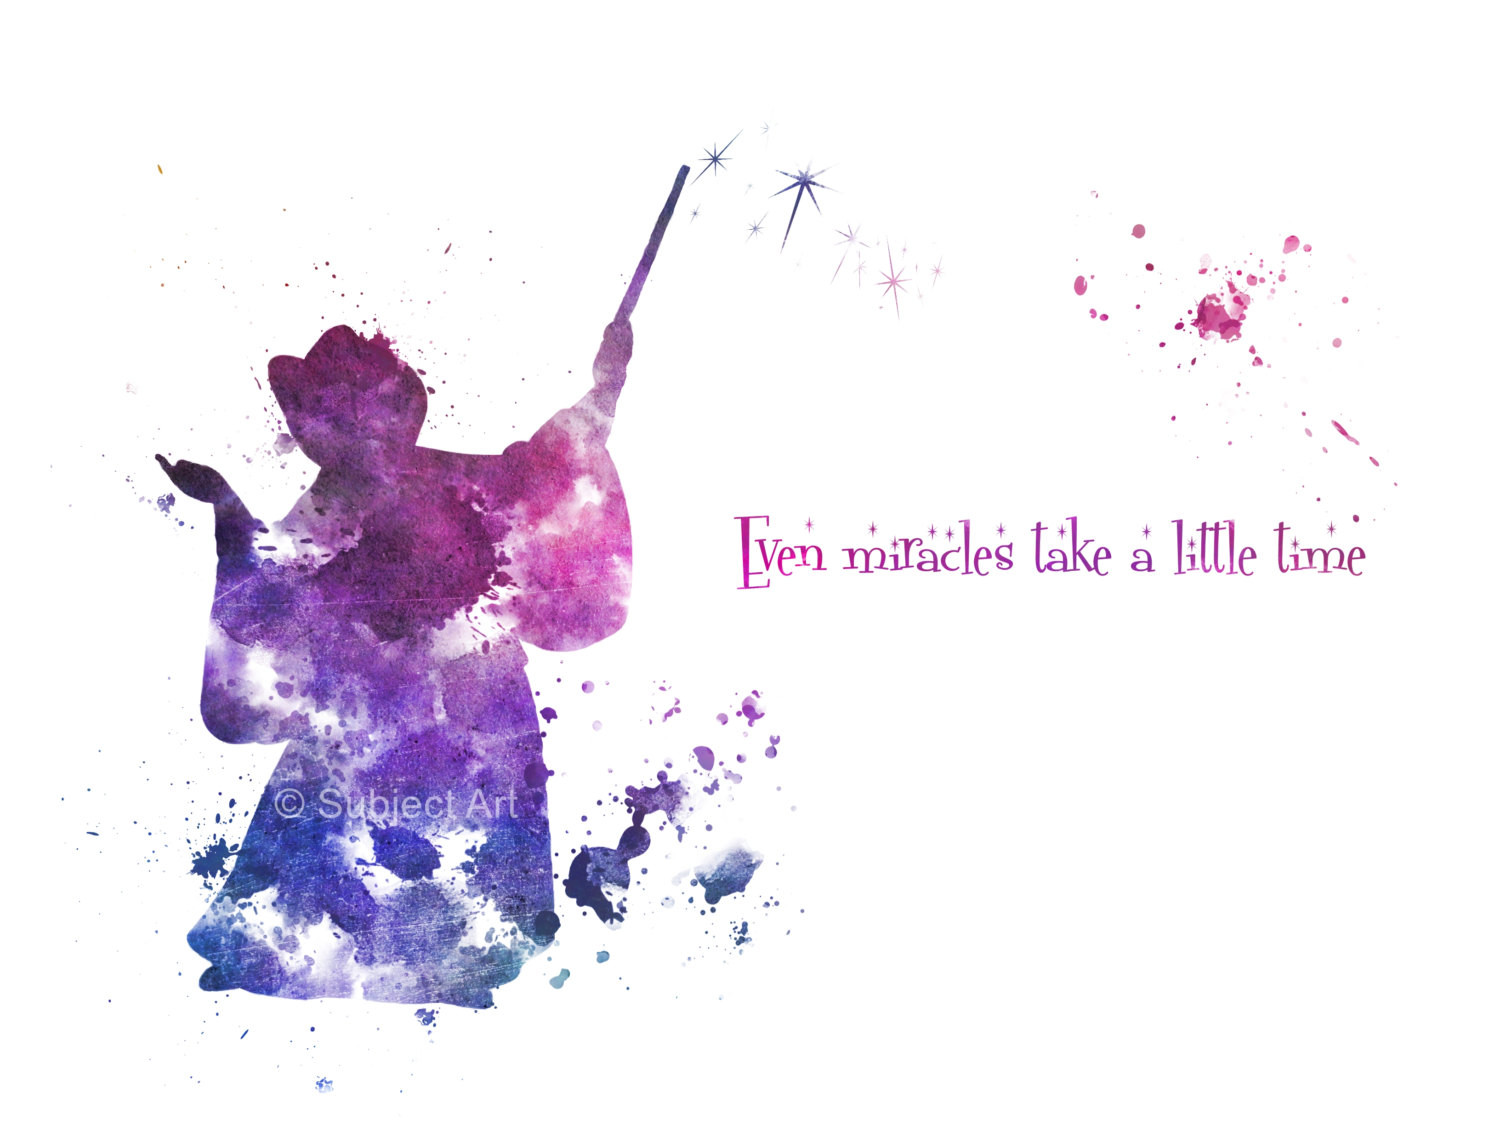 Fairy Godmother Quotes
 ART PRINT The Fairy Godmother Quote Even Miracles take a